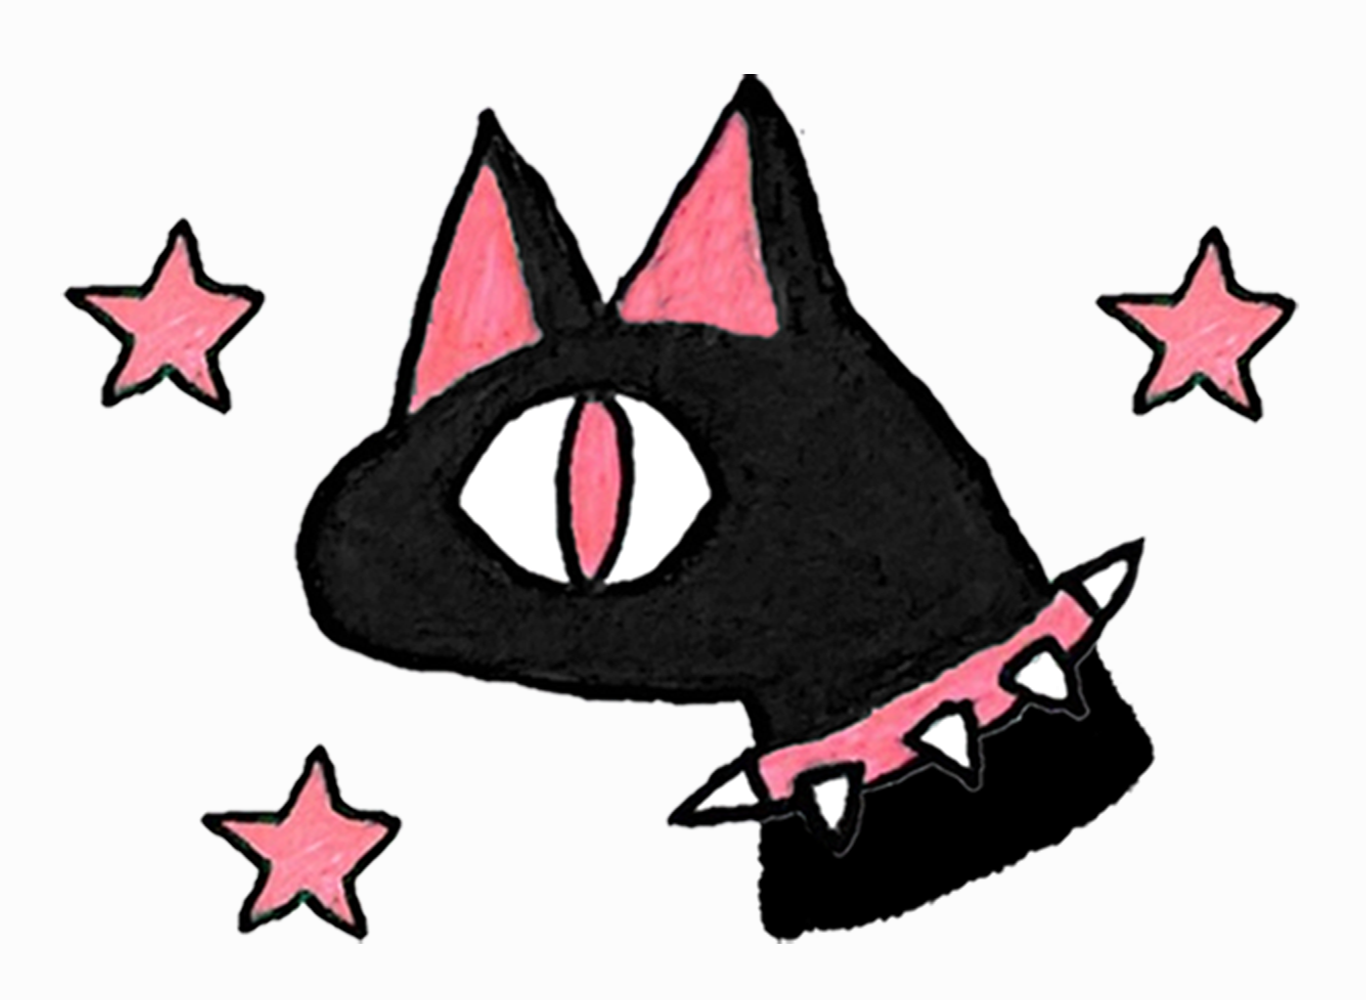 Headshot drawing of a simply stylized, vaguely cat-like critter that is solid black with pink details, wearing a pink spiked collar around their neck. They are surrounded by 3 small pink stars and centered on a slightly off-white background.